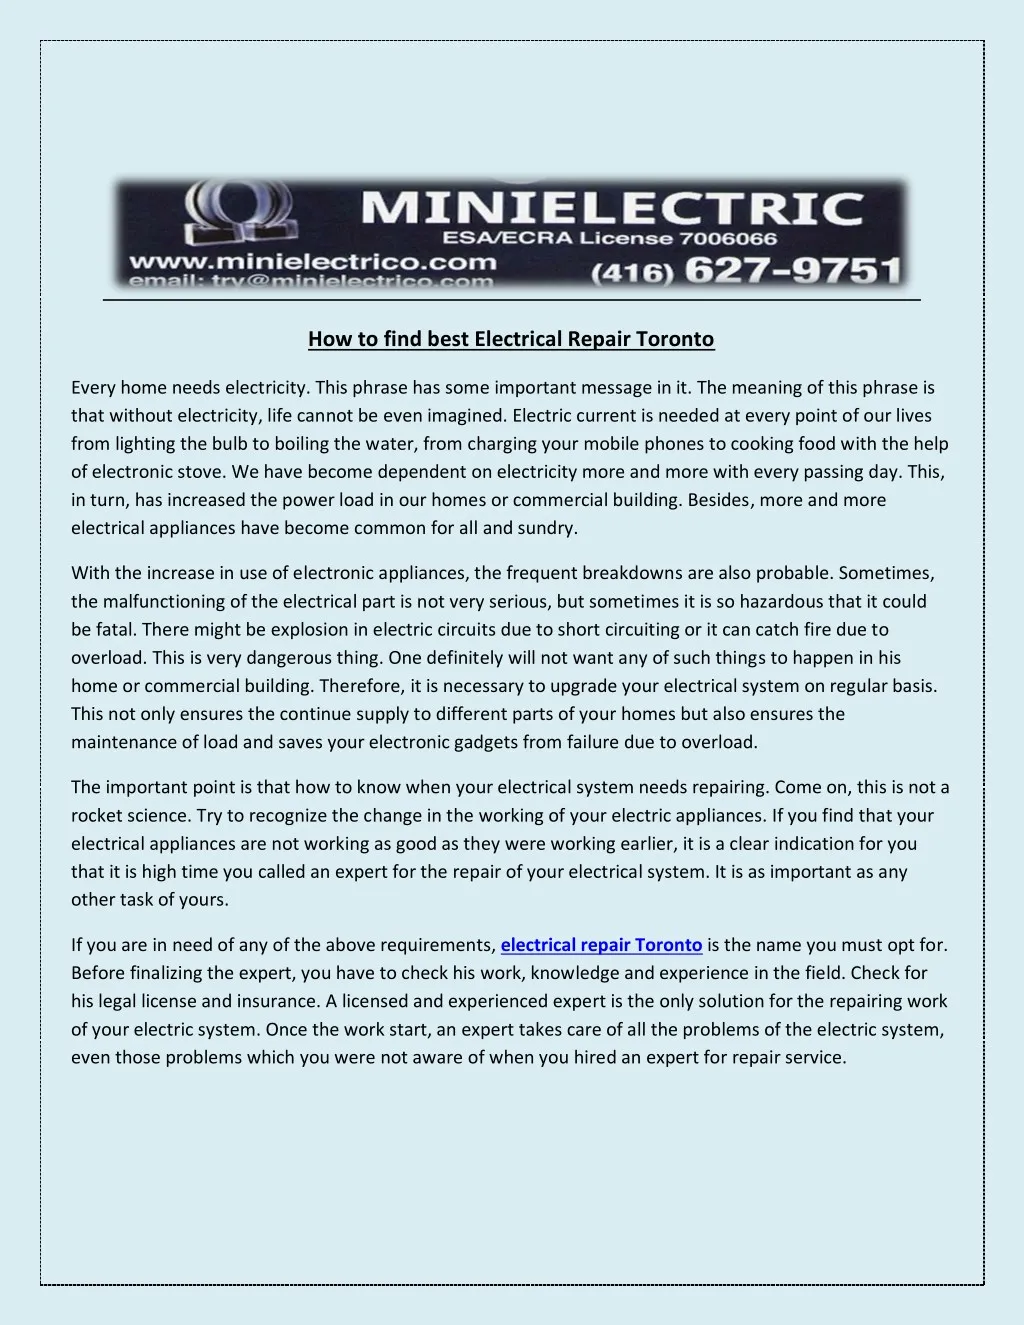 how to find best electrical repair toronto